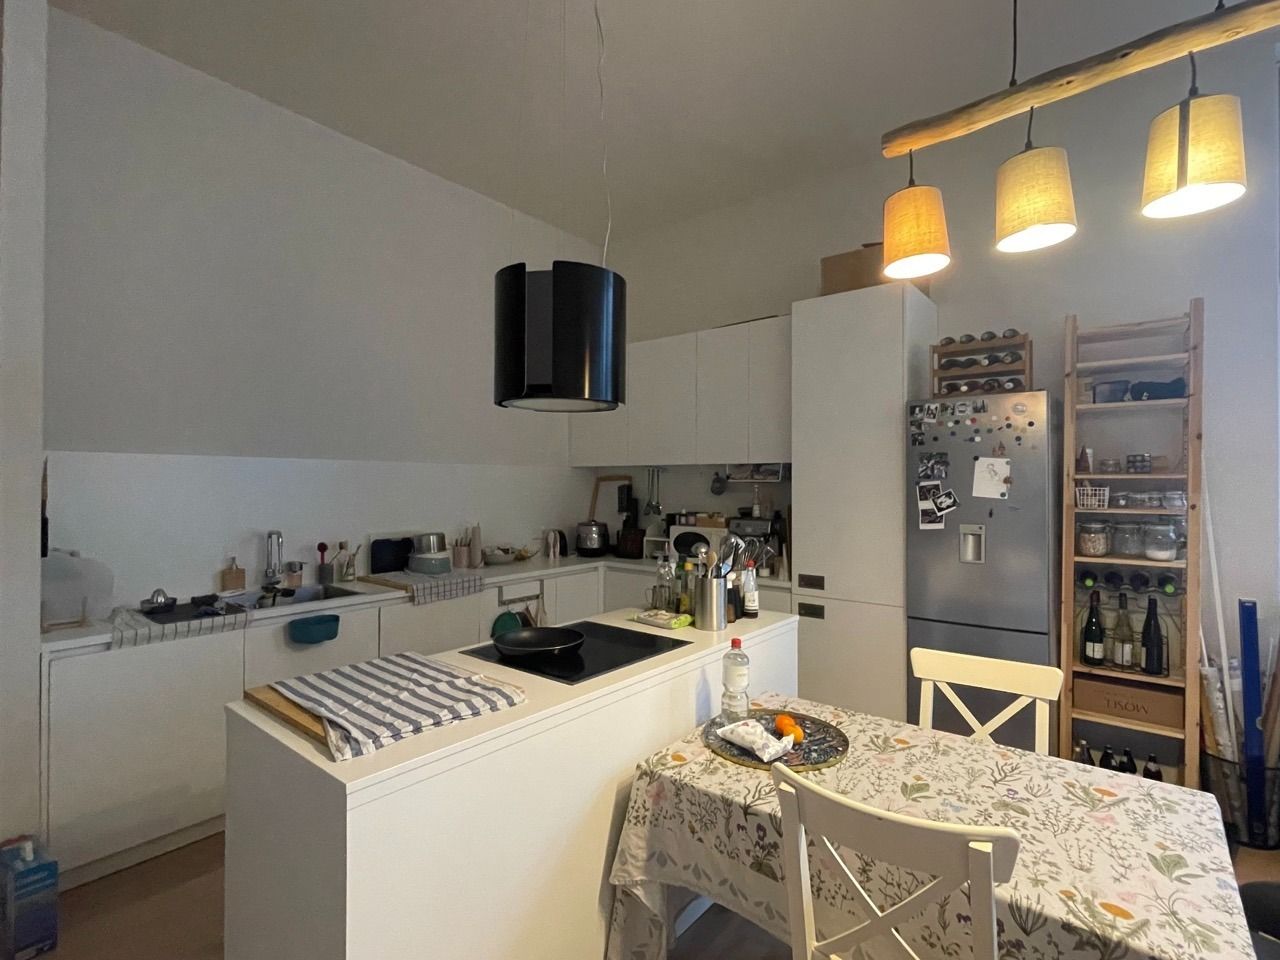 Neubau flat in Prenzlauer Berg for rent between March and July 2024